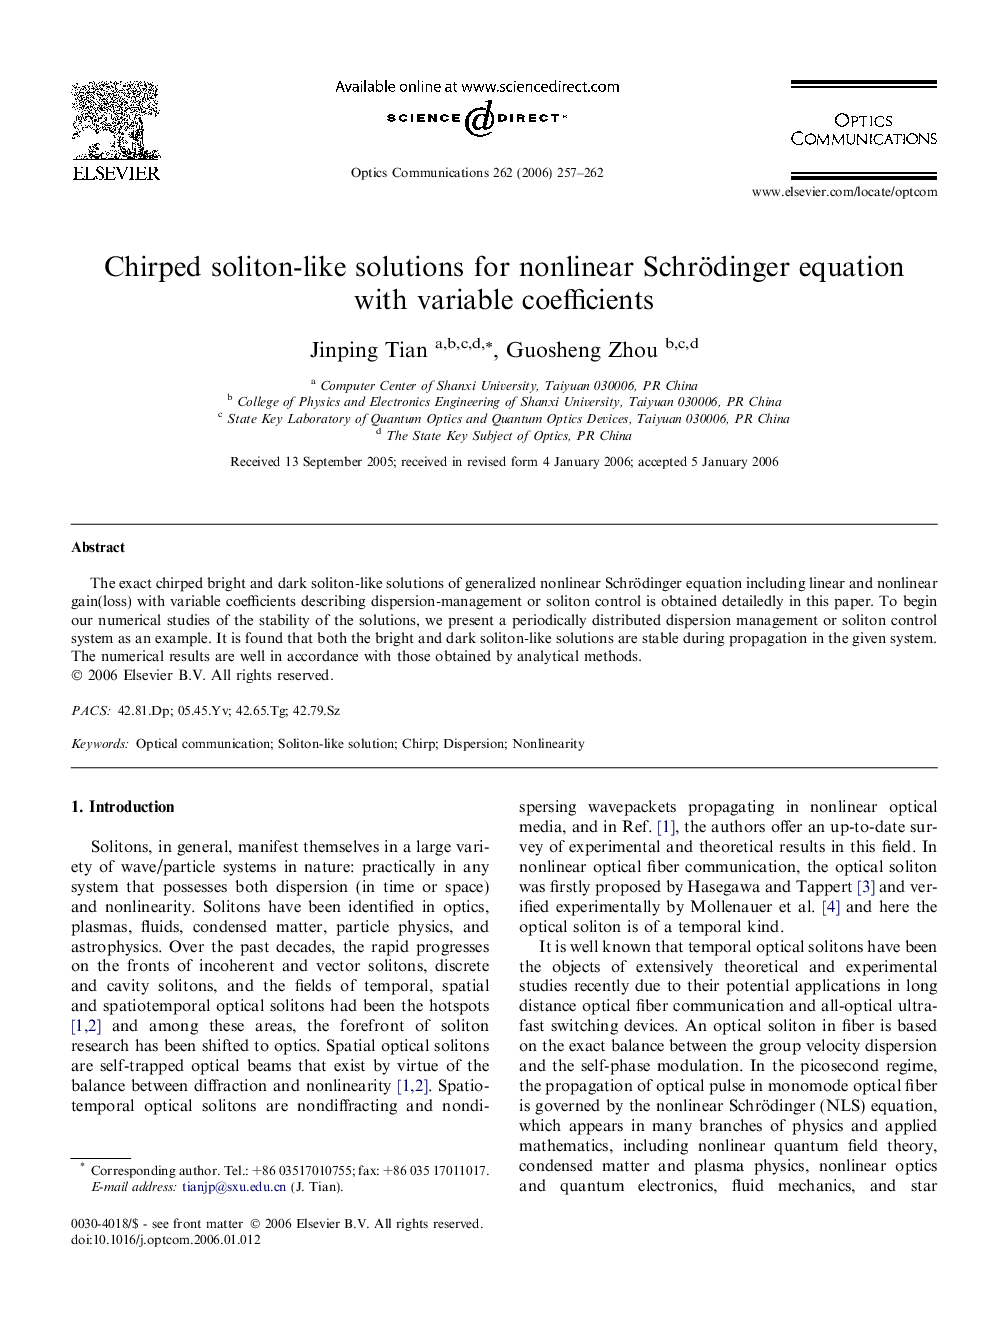 Chirped soliton-like solutions for nonlinear Schrödinger equation with variable coefficients